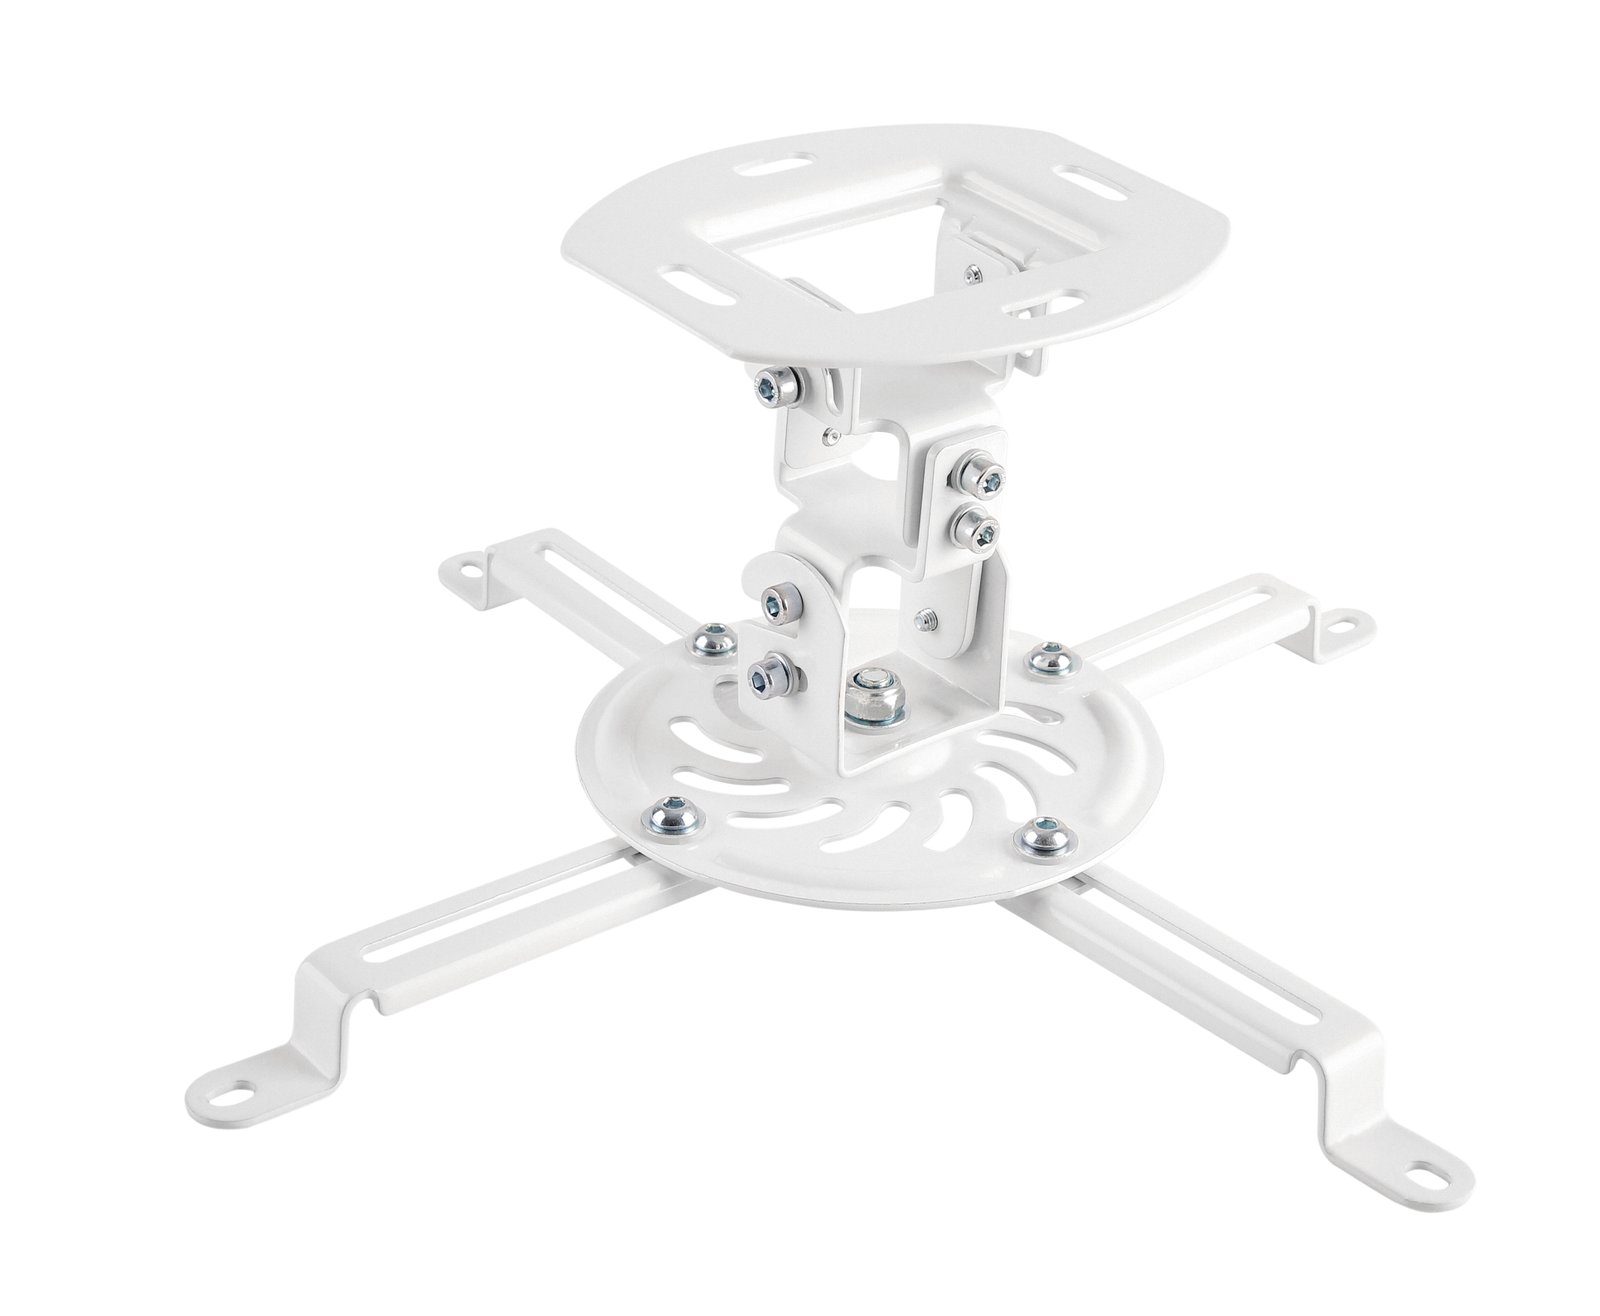 Heavy-duty projector ceiling mount (for pitched or flat ceiling)